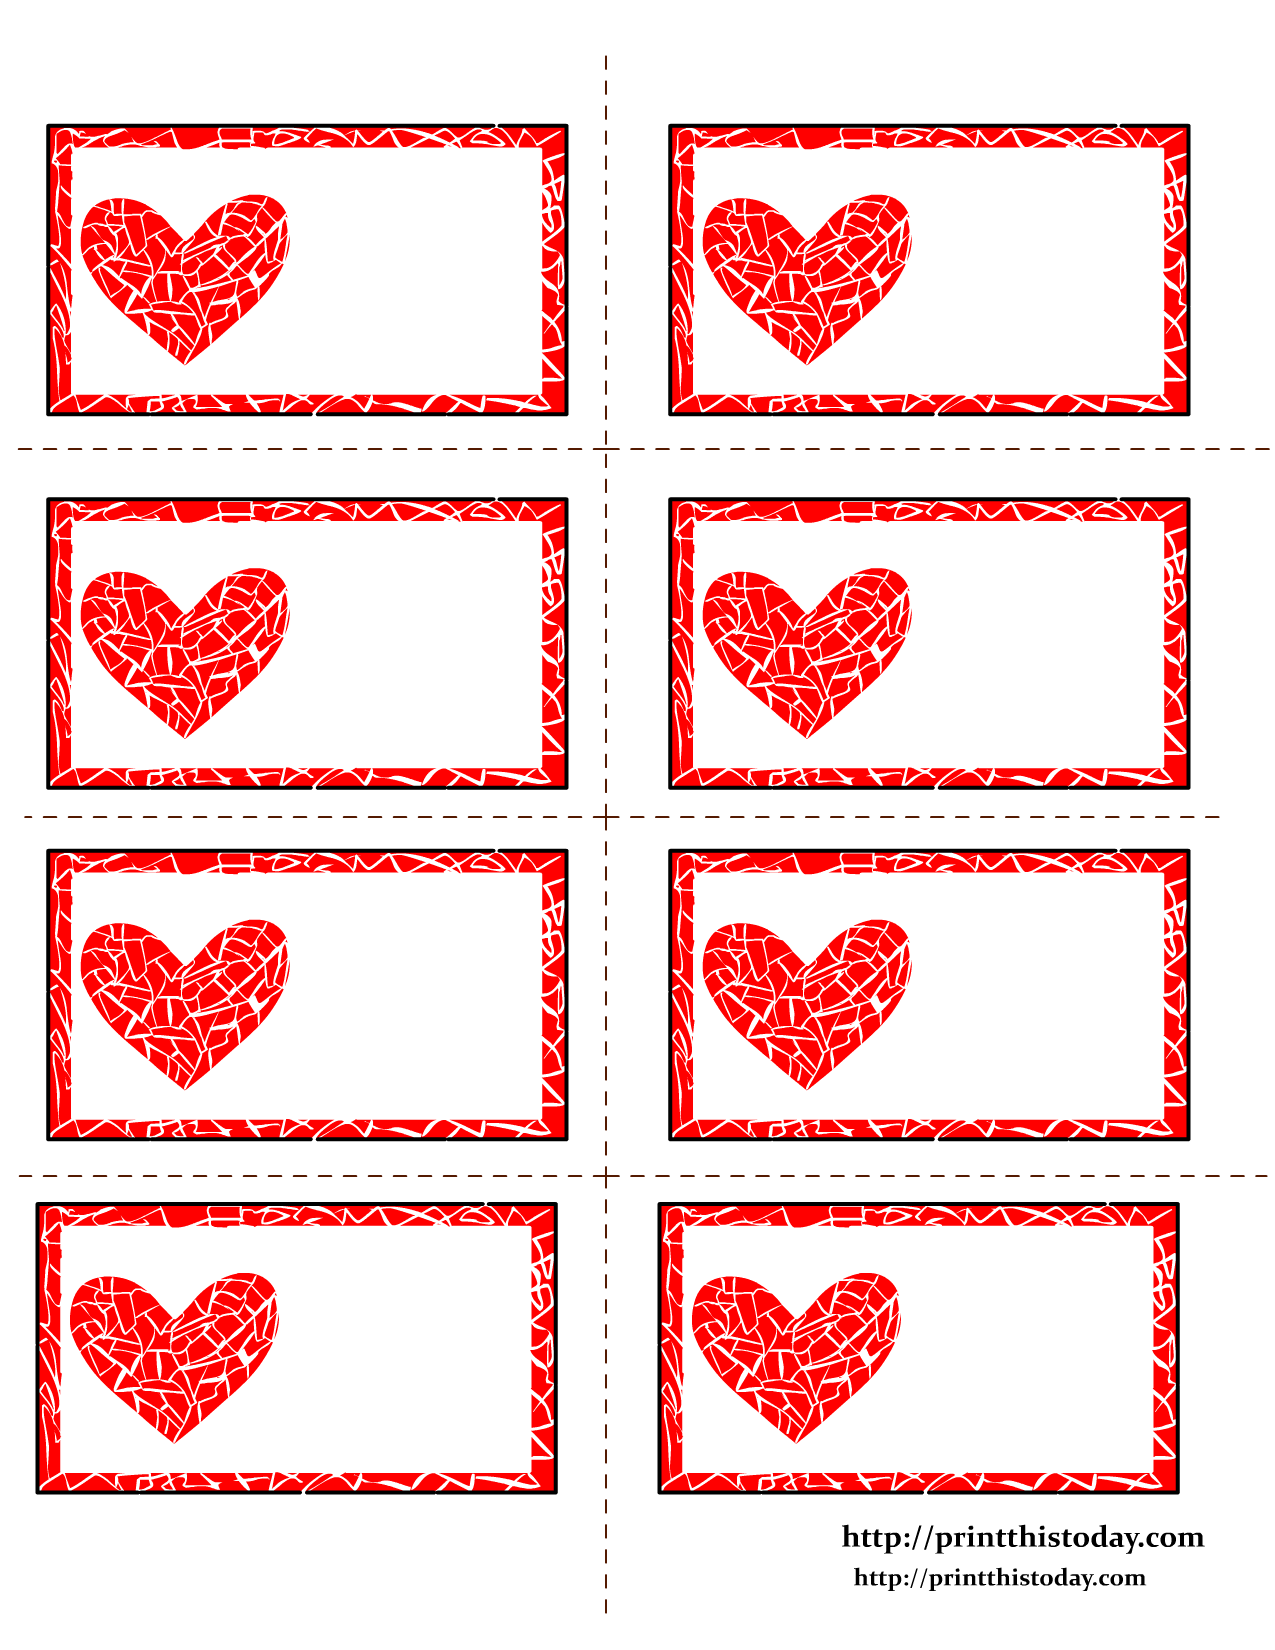 5 Best Images of Free Printable Label Borders Doodle Border Free